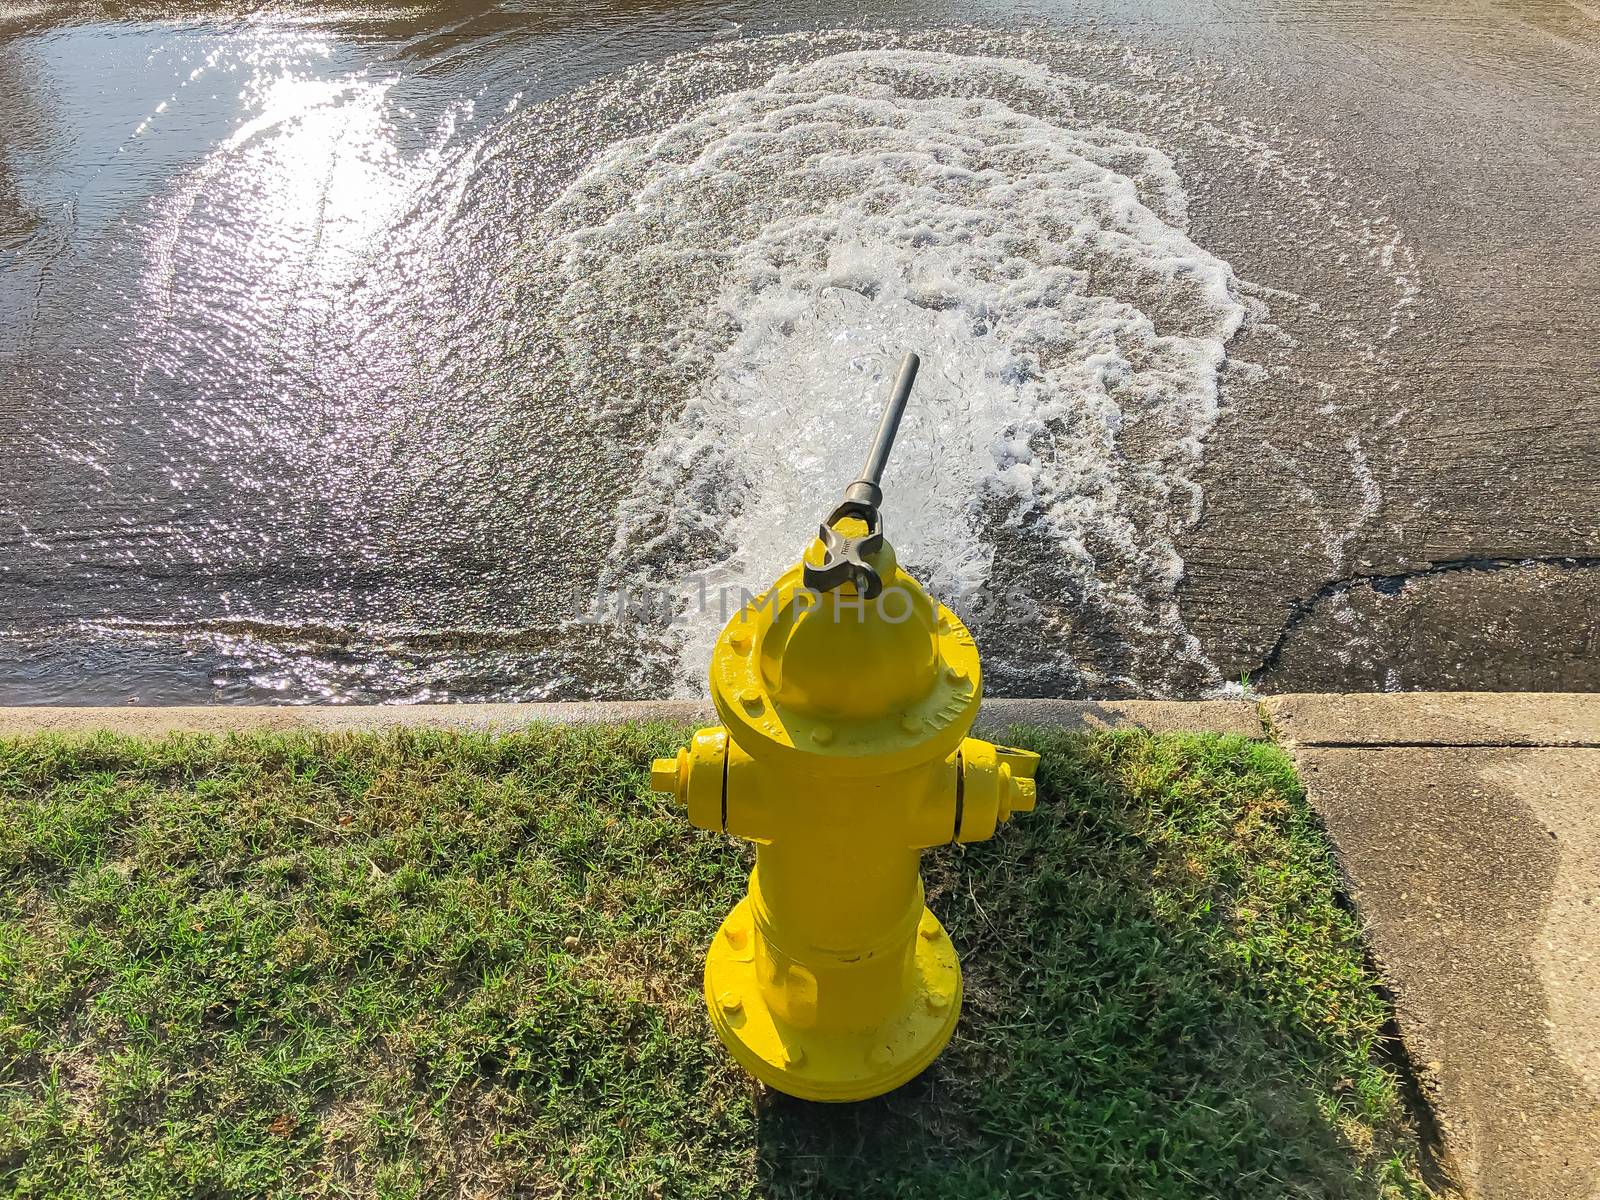 Top view yellow fire hydrant gushing water across a residential street near Dallas, Texas, USA by trongnguyen